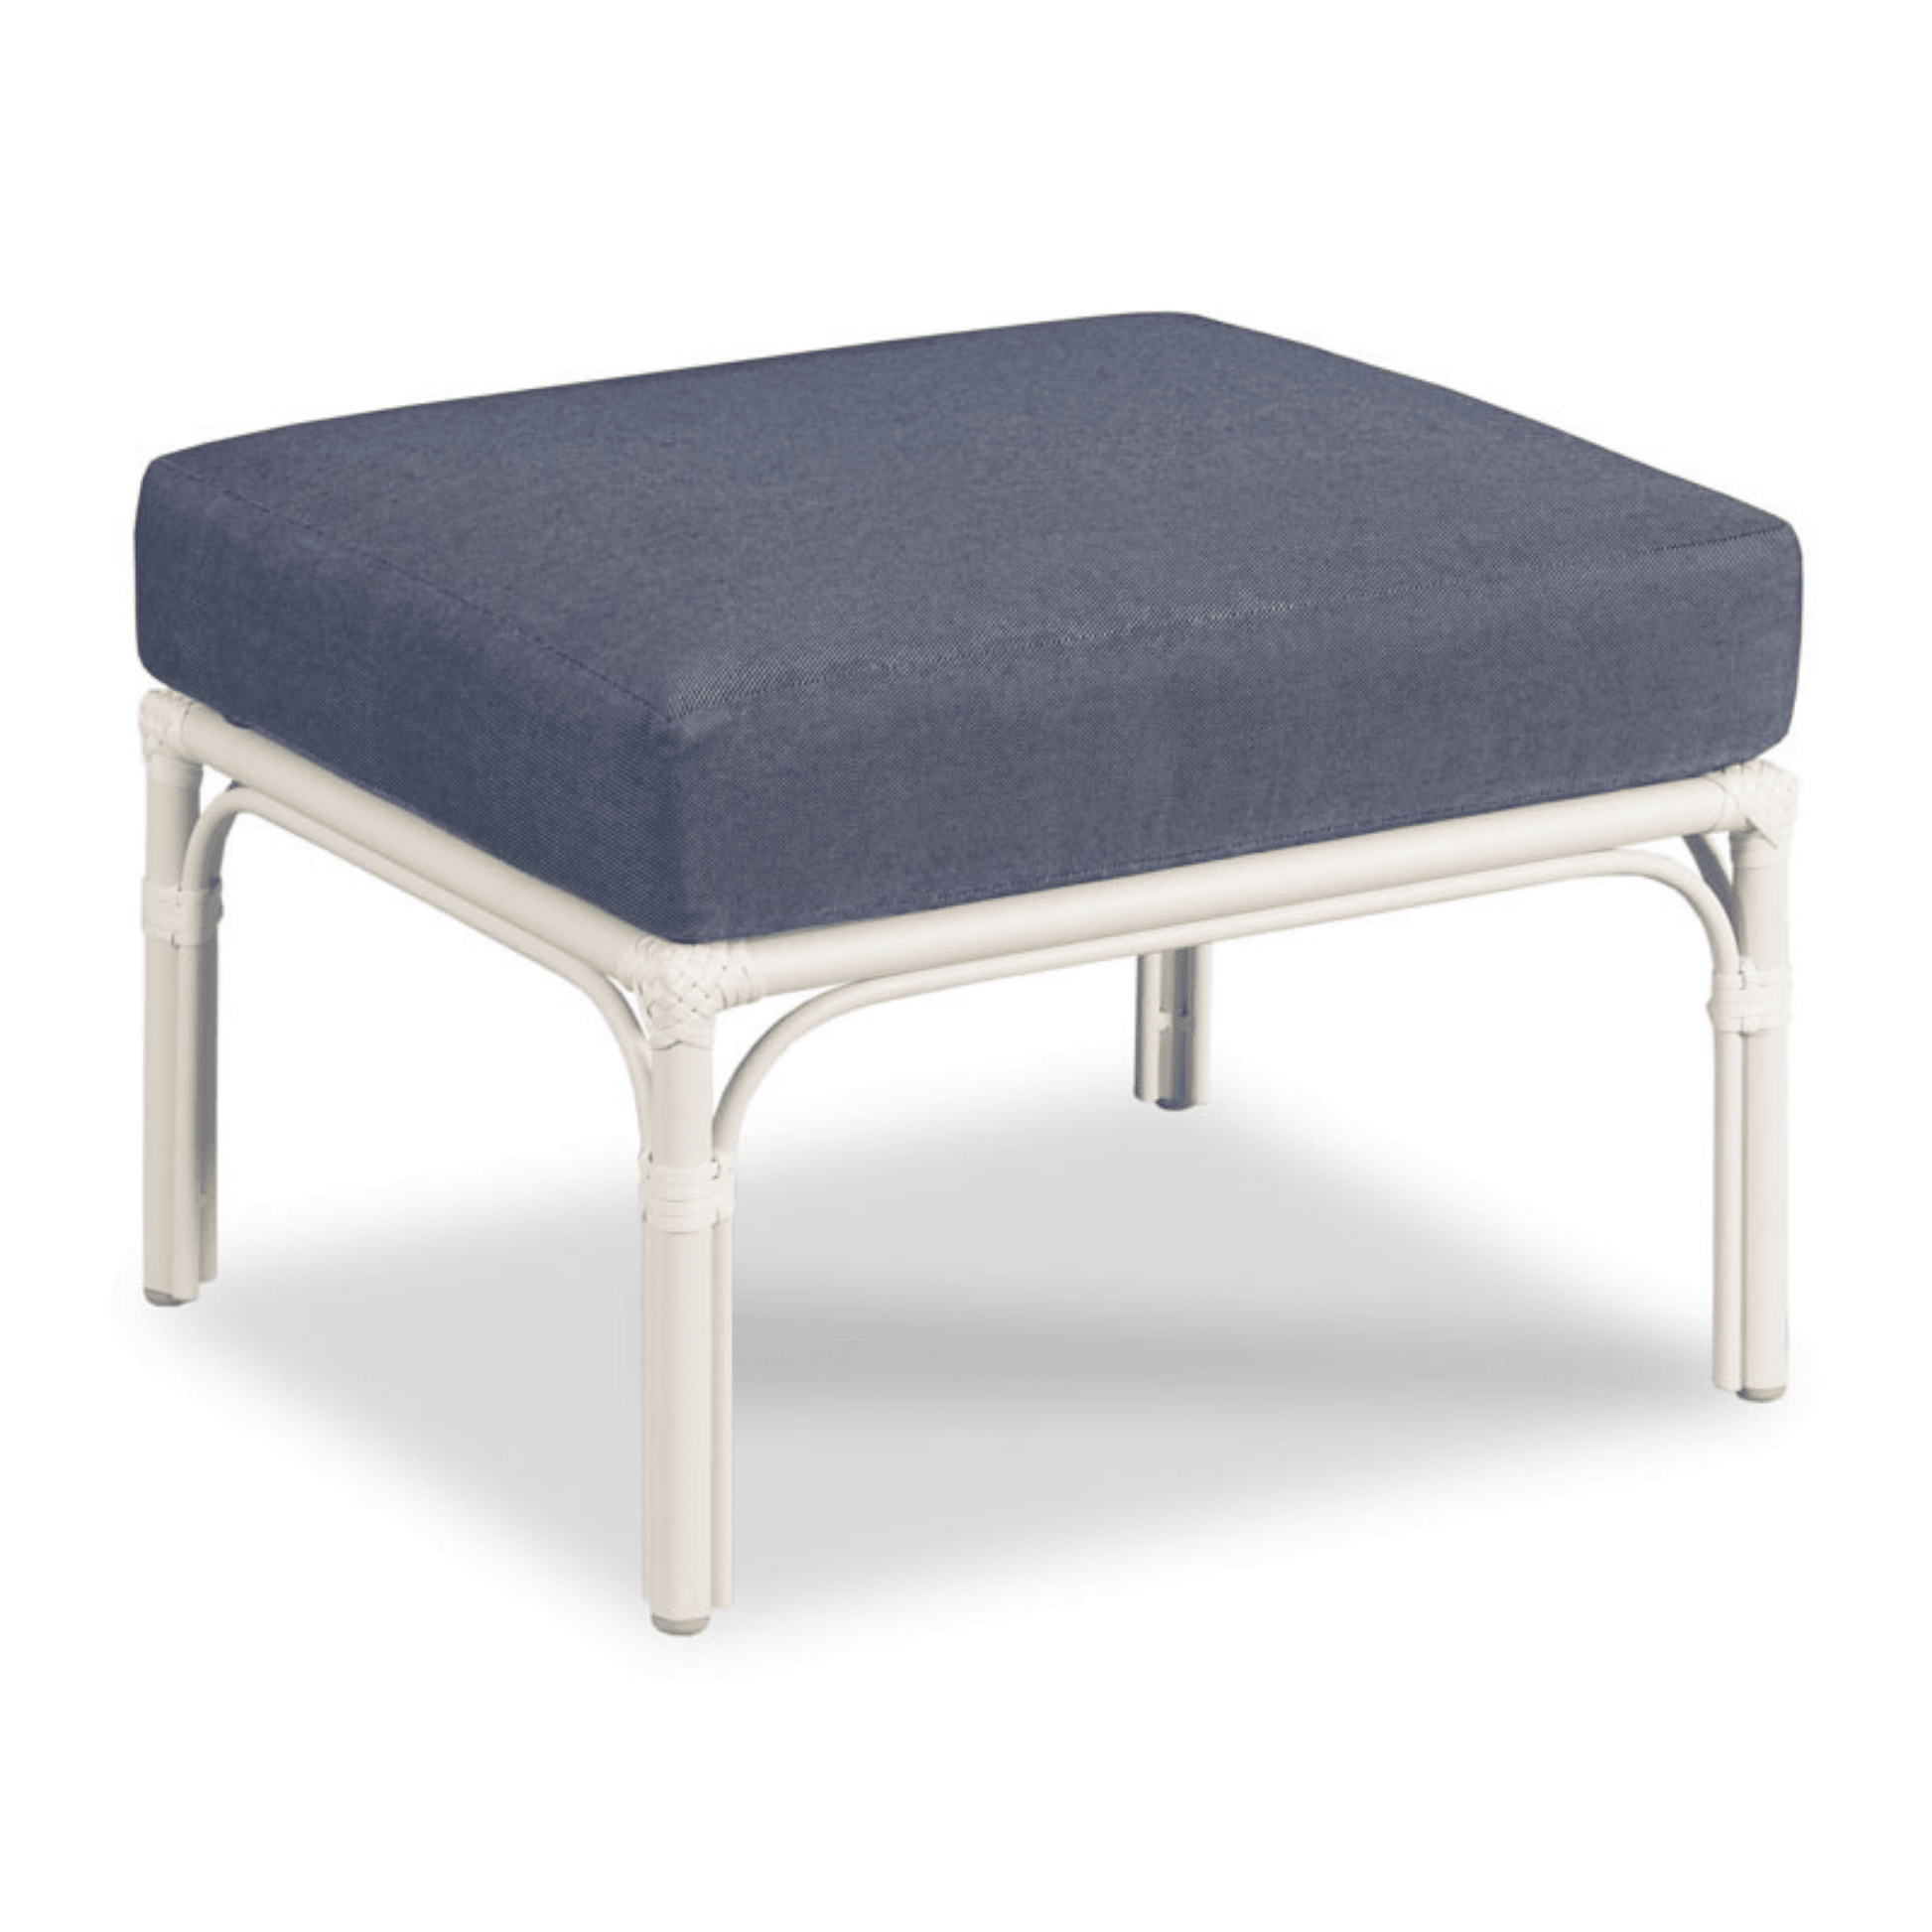 Carlyle Outdoor Ottoman - Fairley Fancy 